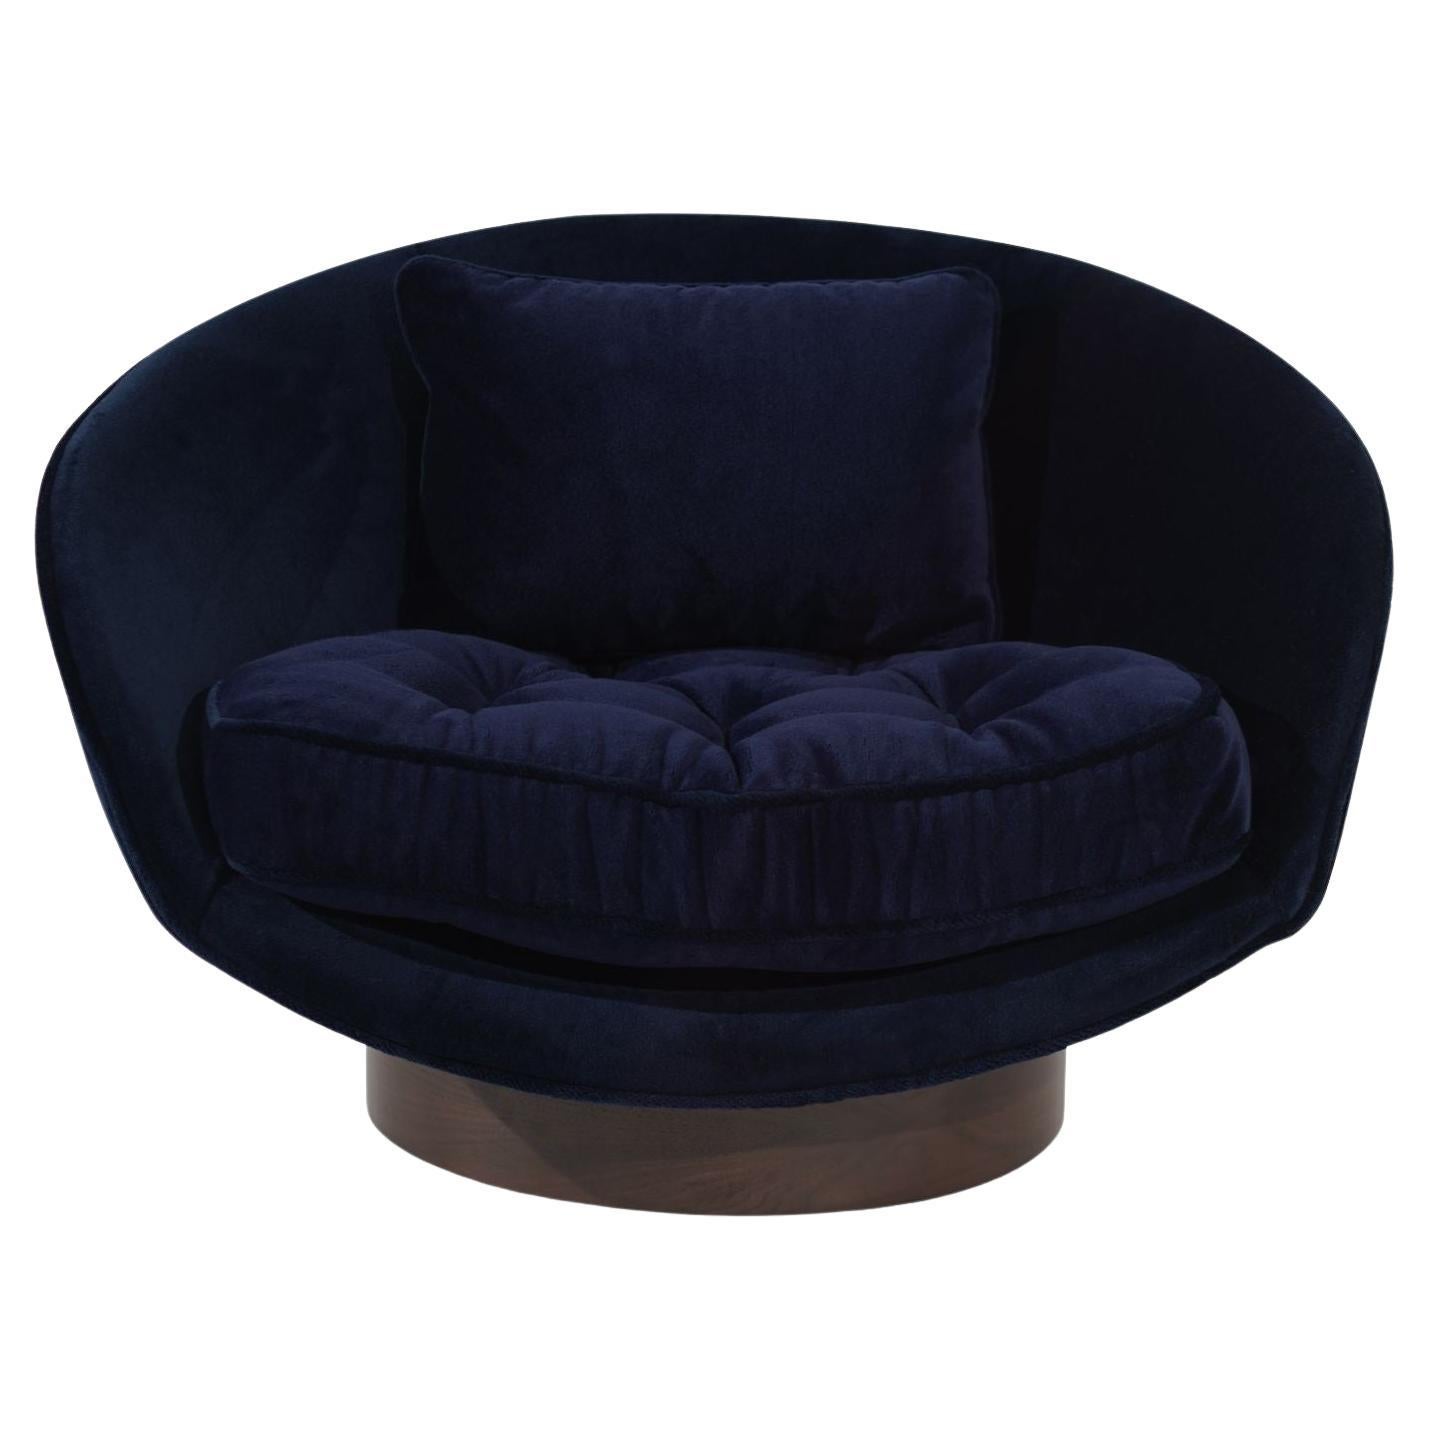 Low Profile Lounge Chair in Navy Alpaca Velvet by Adrian Pearsall, C. 1950s